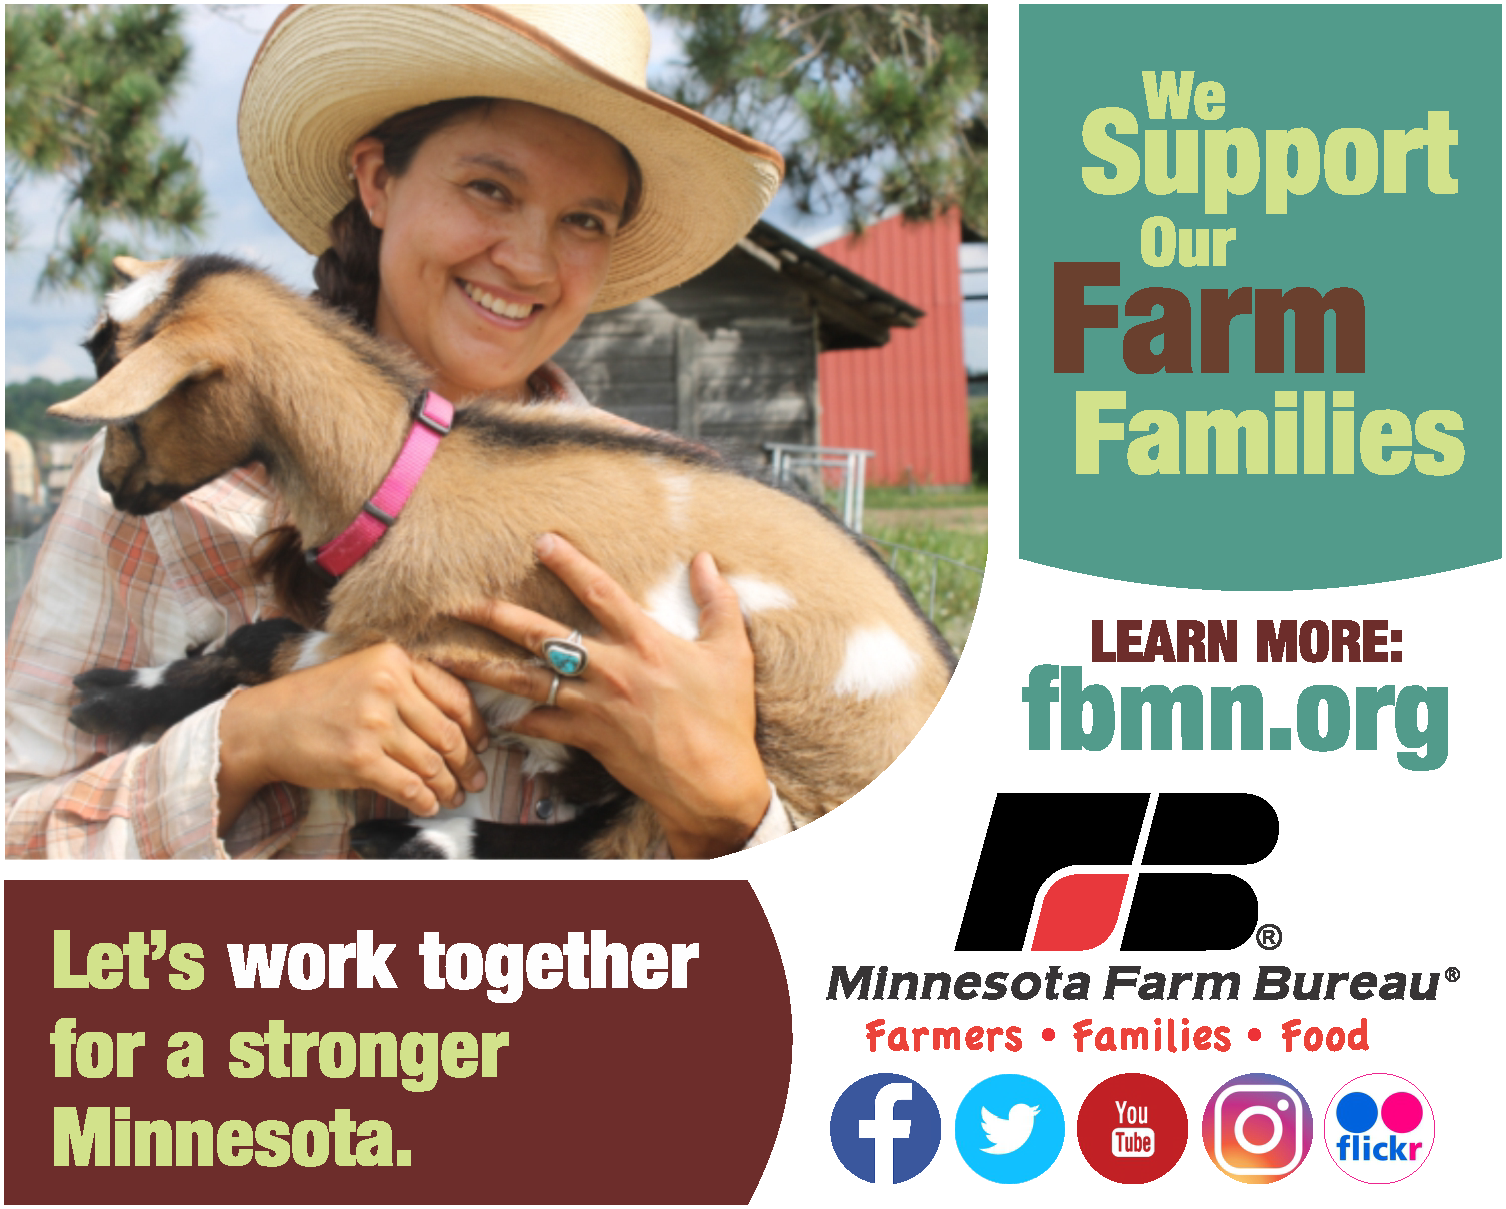 Image of girl holding a goat. Text says We support our farm families and let